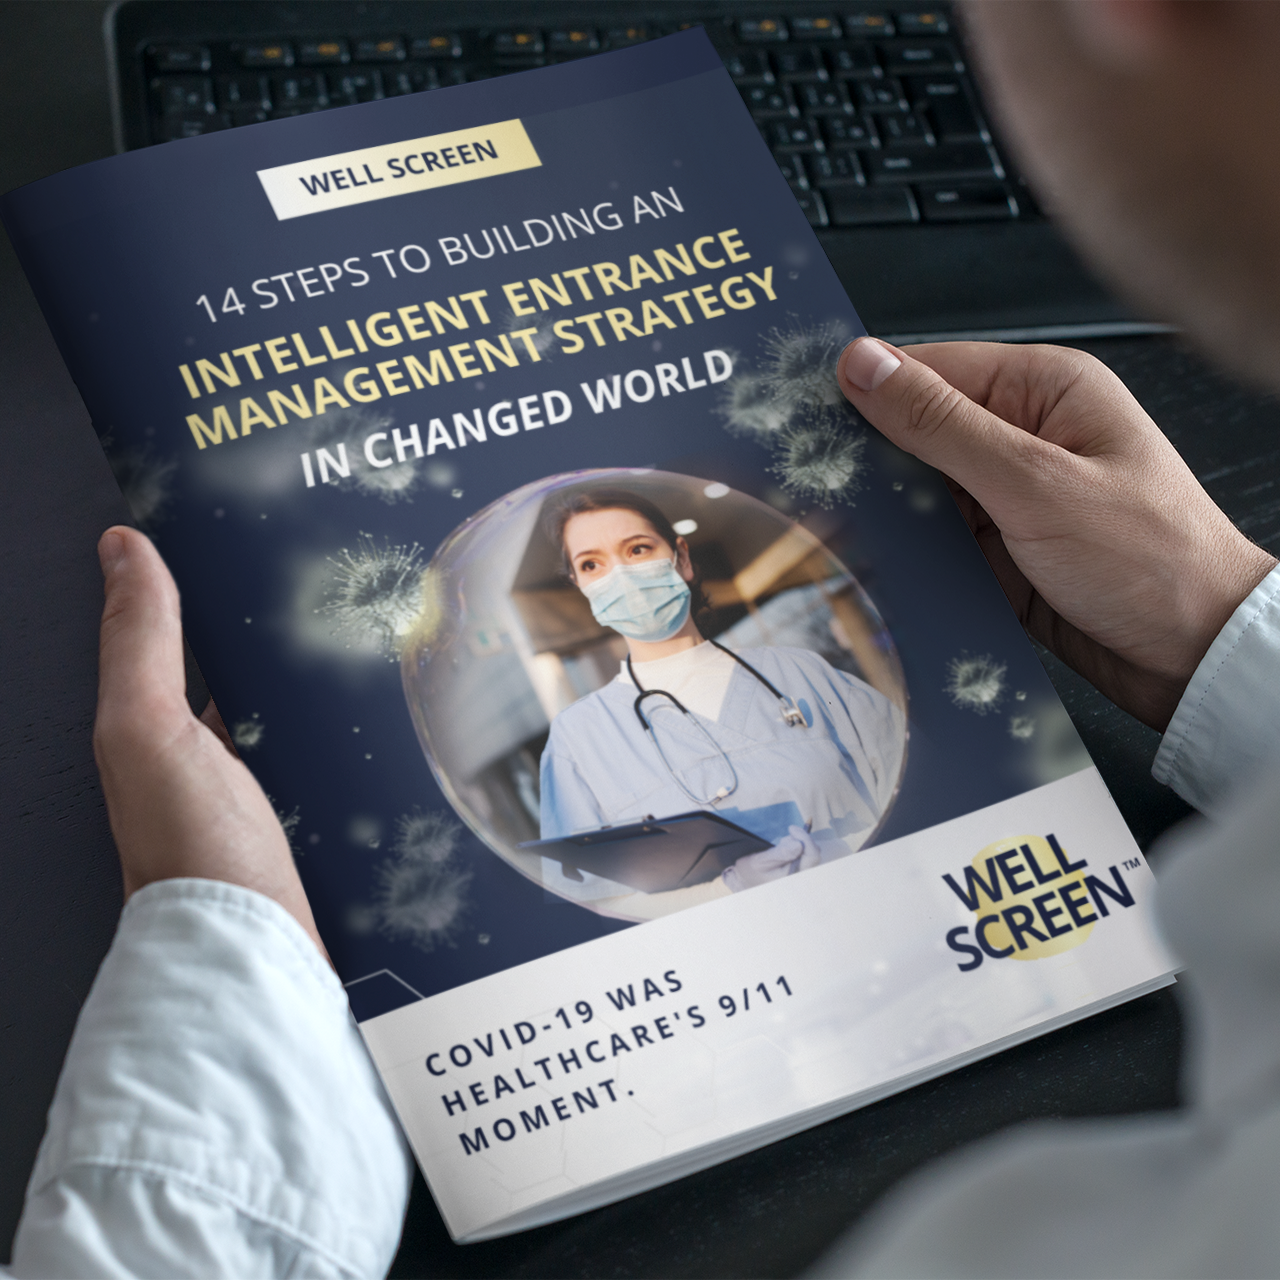 Man holding a magazine with the title: 14 Steps to Building an Intelligent Entrance Management Strategy in a Changed World